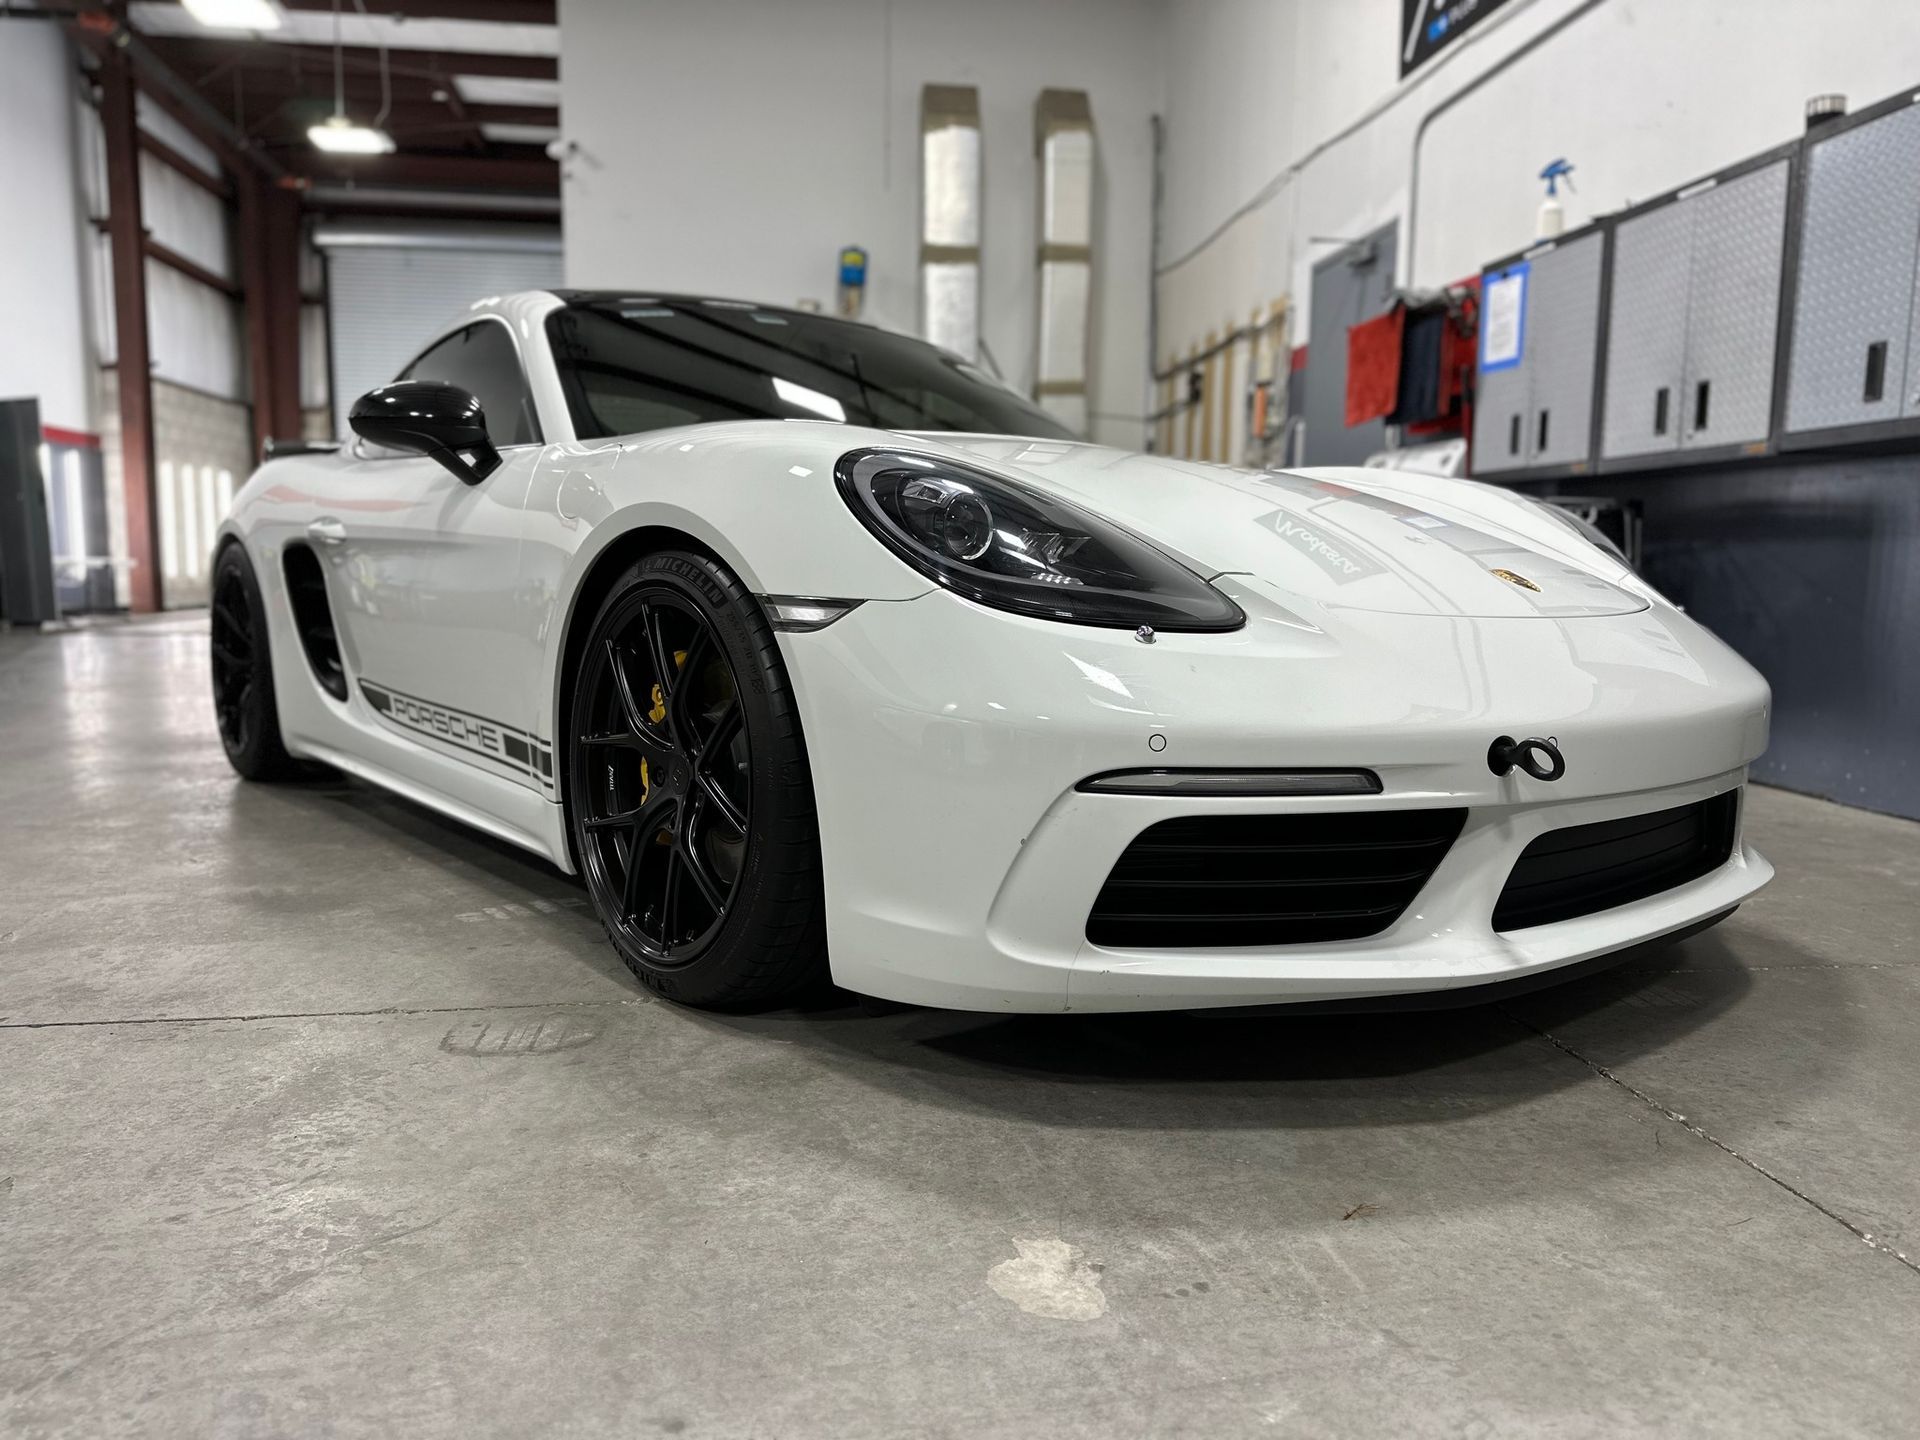 This Porsche Cayman S treated to a meticulous post track maintenance detail with the finest in autom